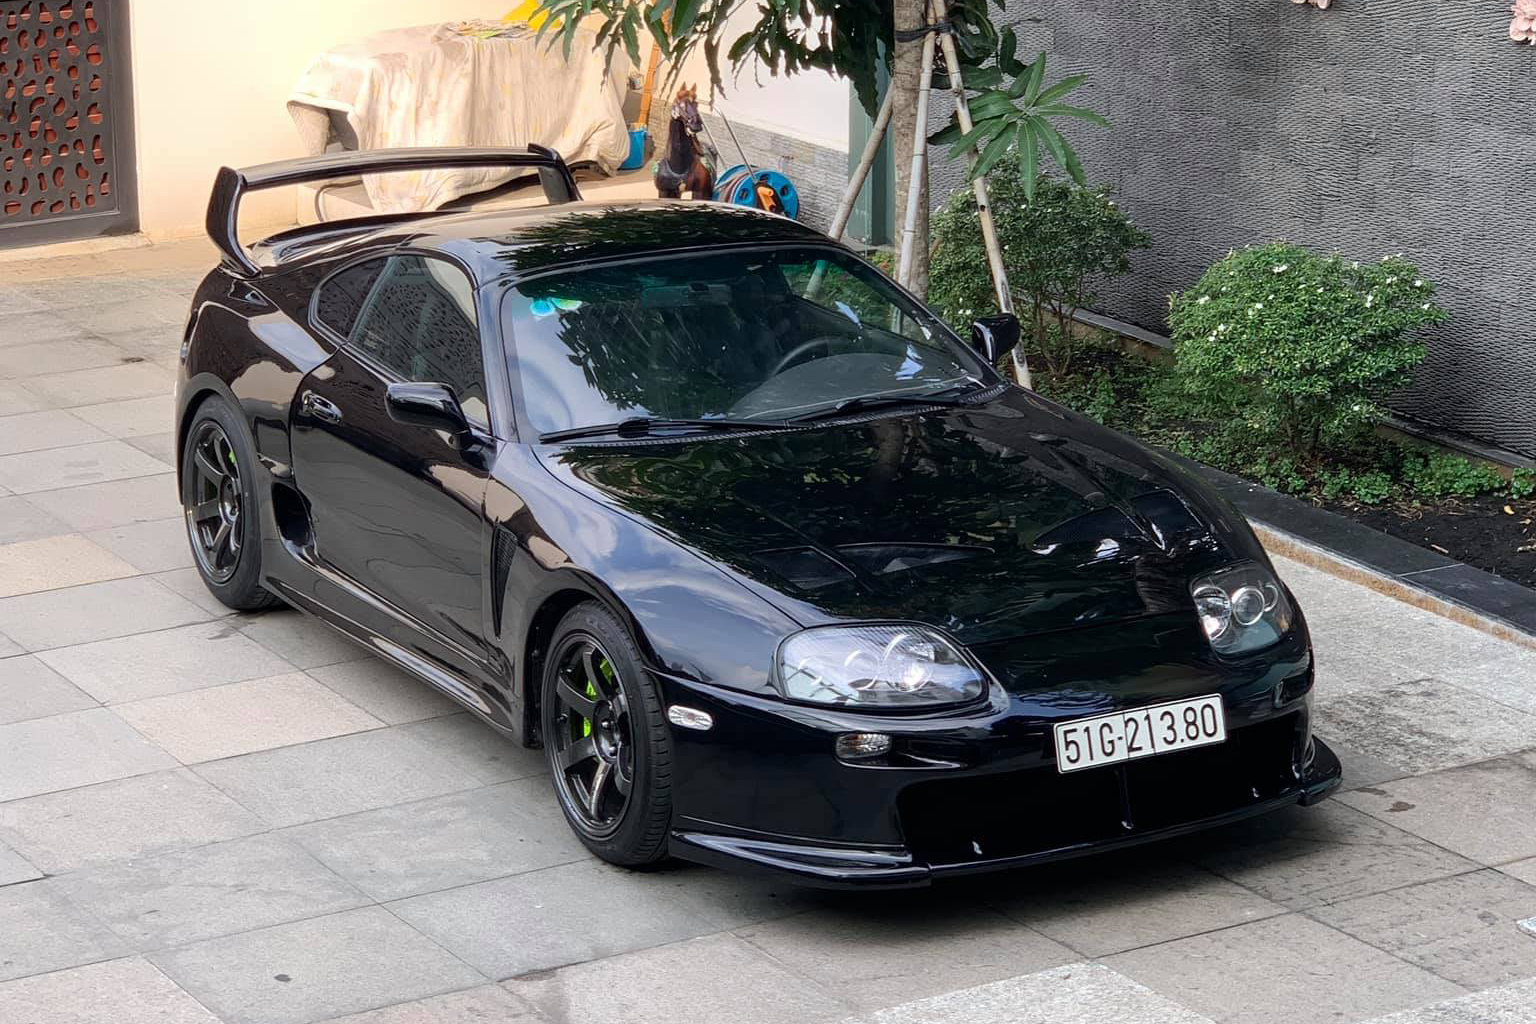 toyota-supra-the-he-4-trung-nguyen-cafeautovn-5